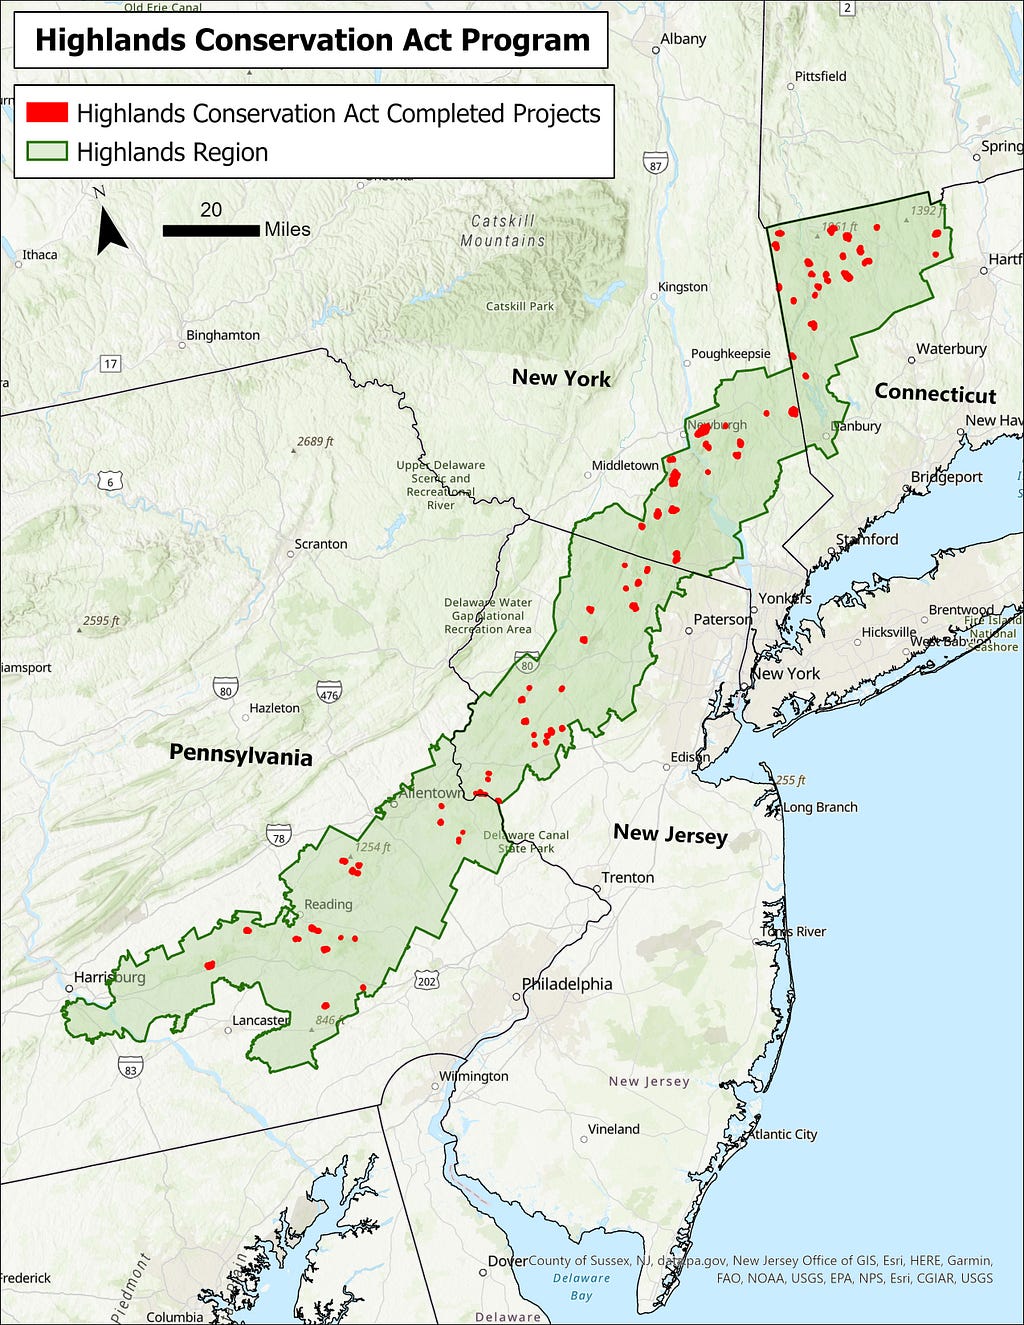 a map with a long, narrow green area spanning from western CT, through norther NK, to eastern PA with dozens of red dots marking project sites within